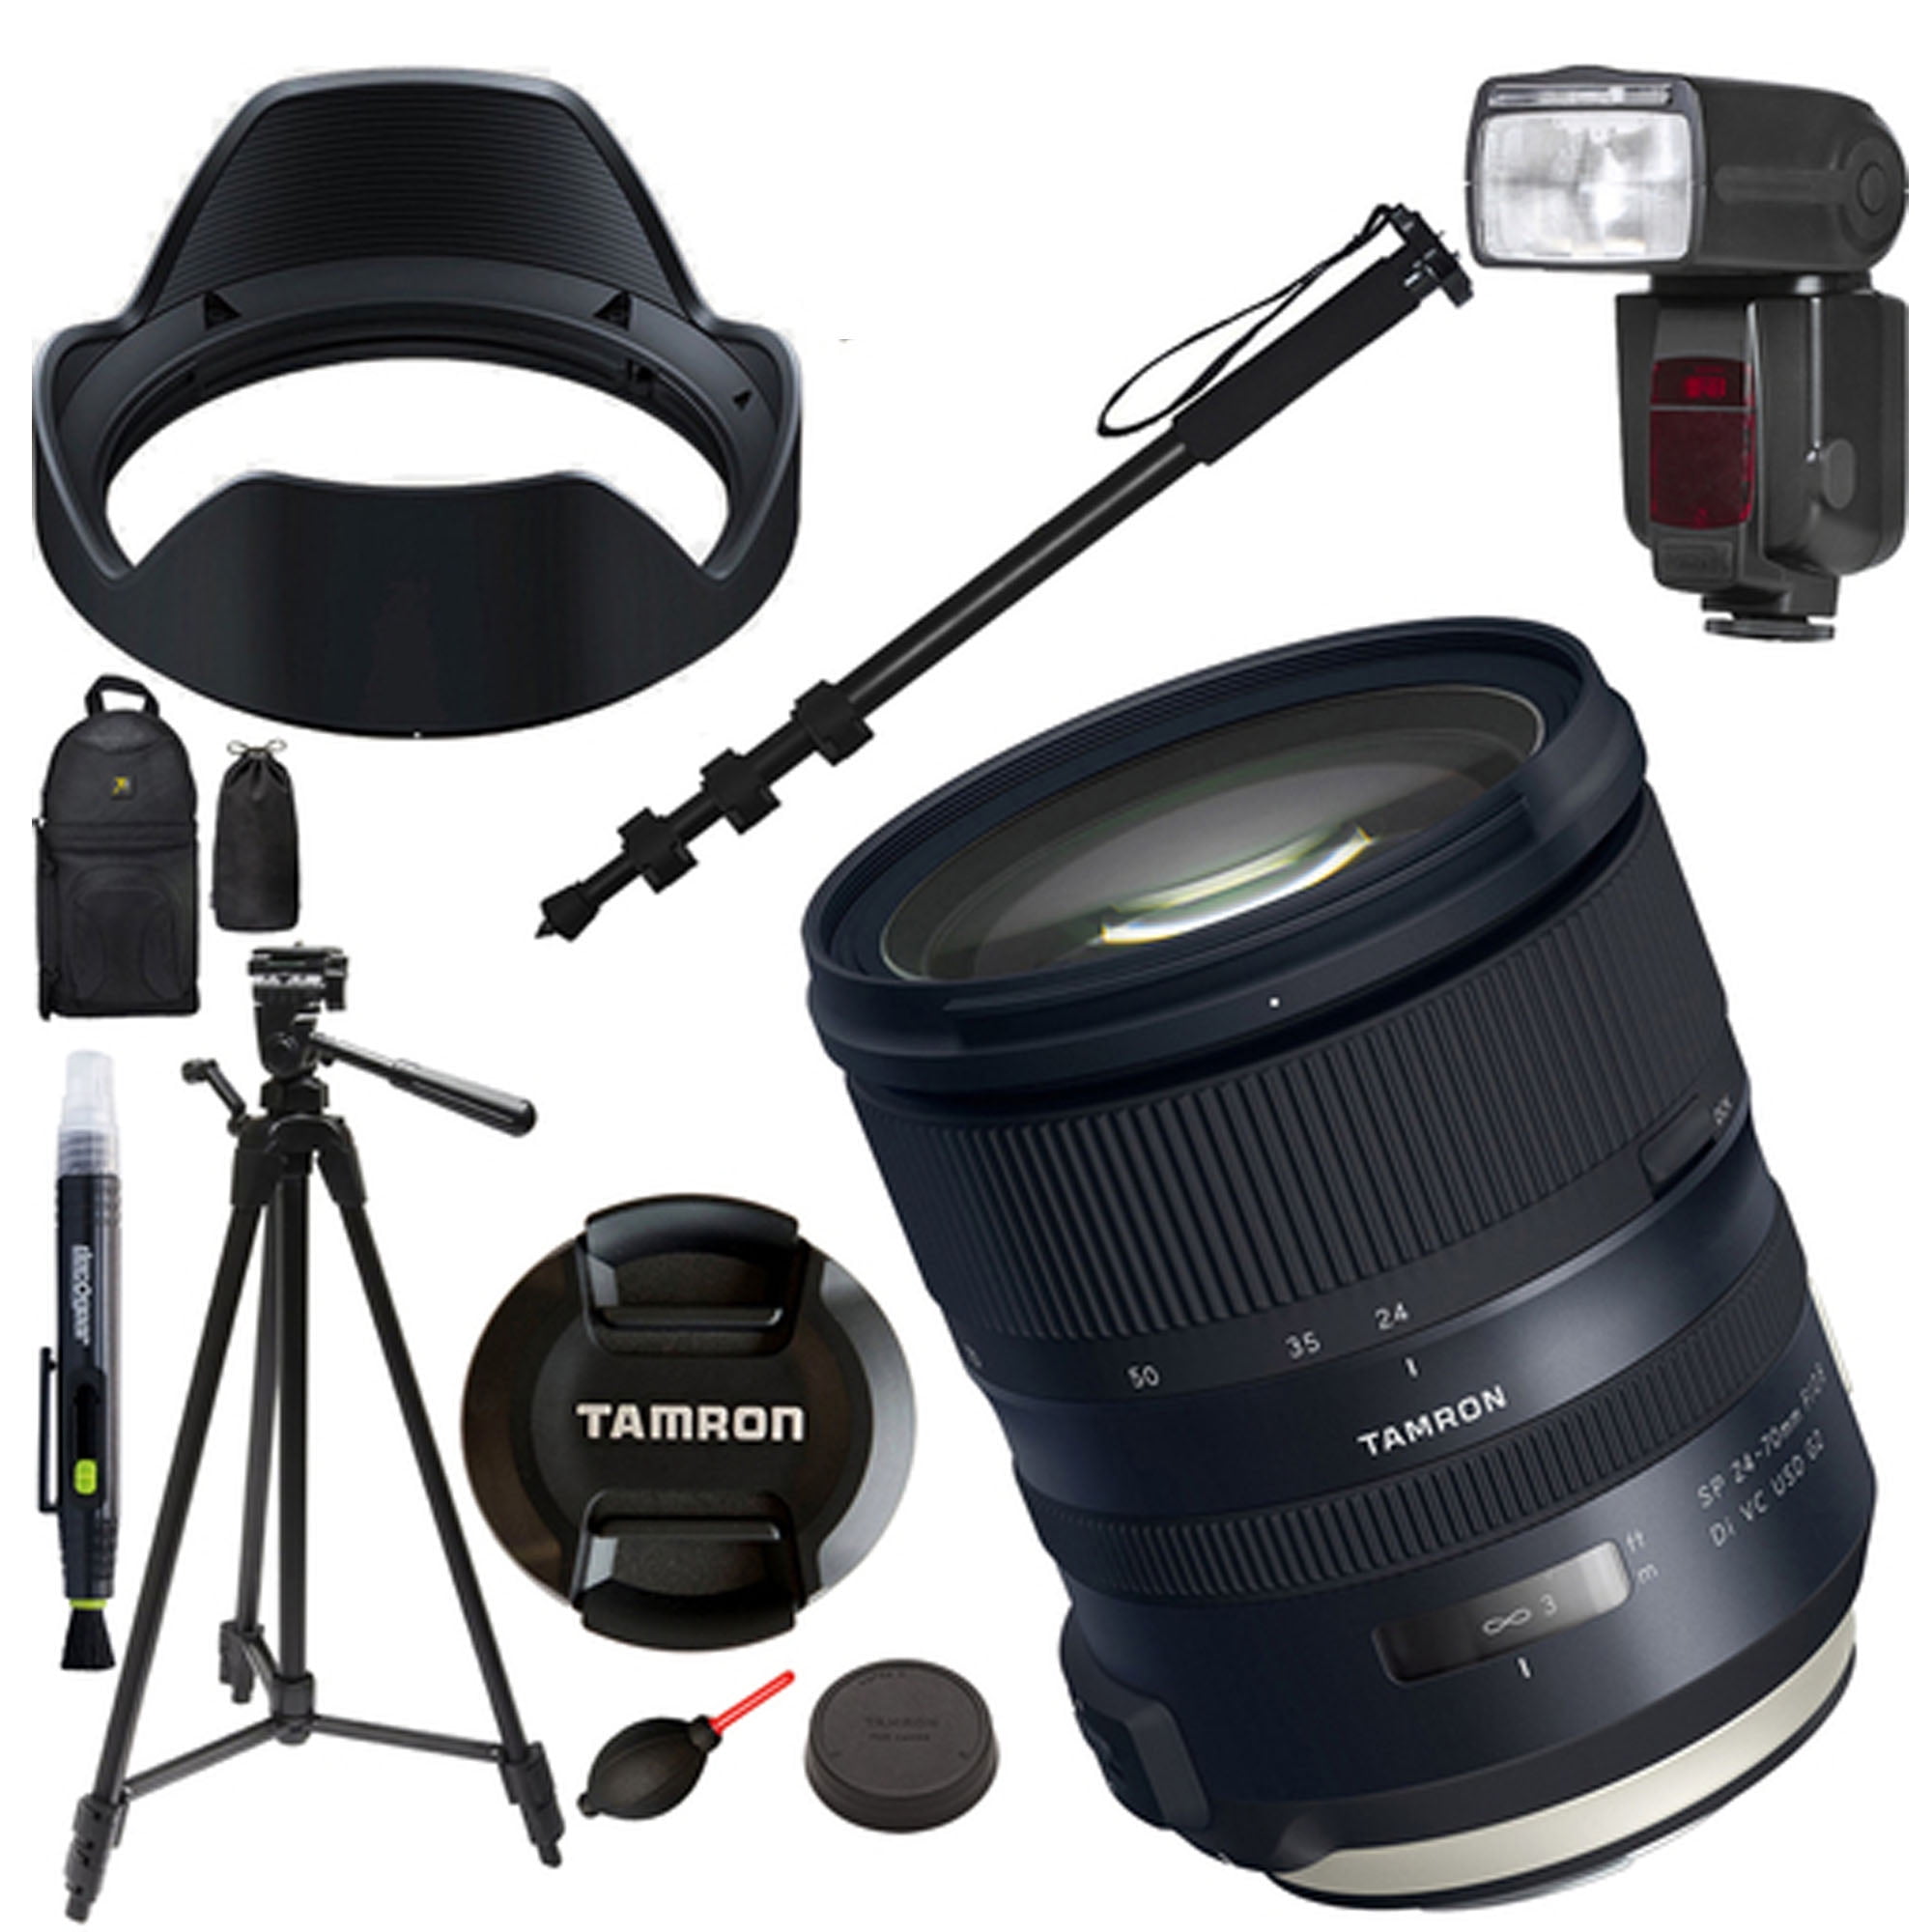 Tamron SP 24-70mm f/2.8 Di VC USD G2 Lens for Nikon F with with